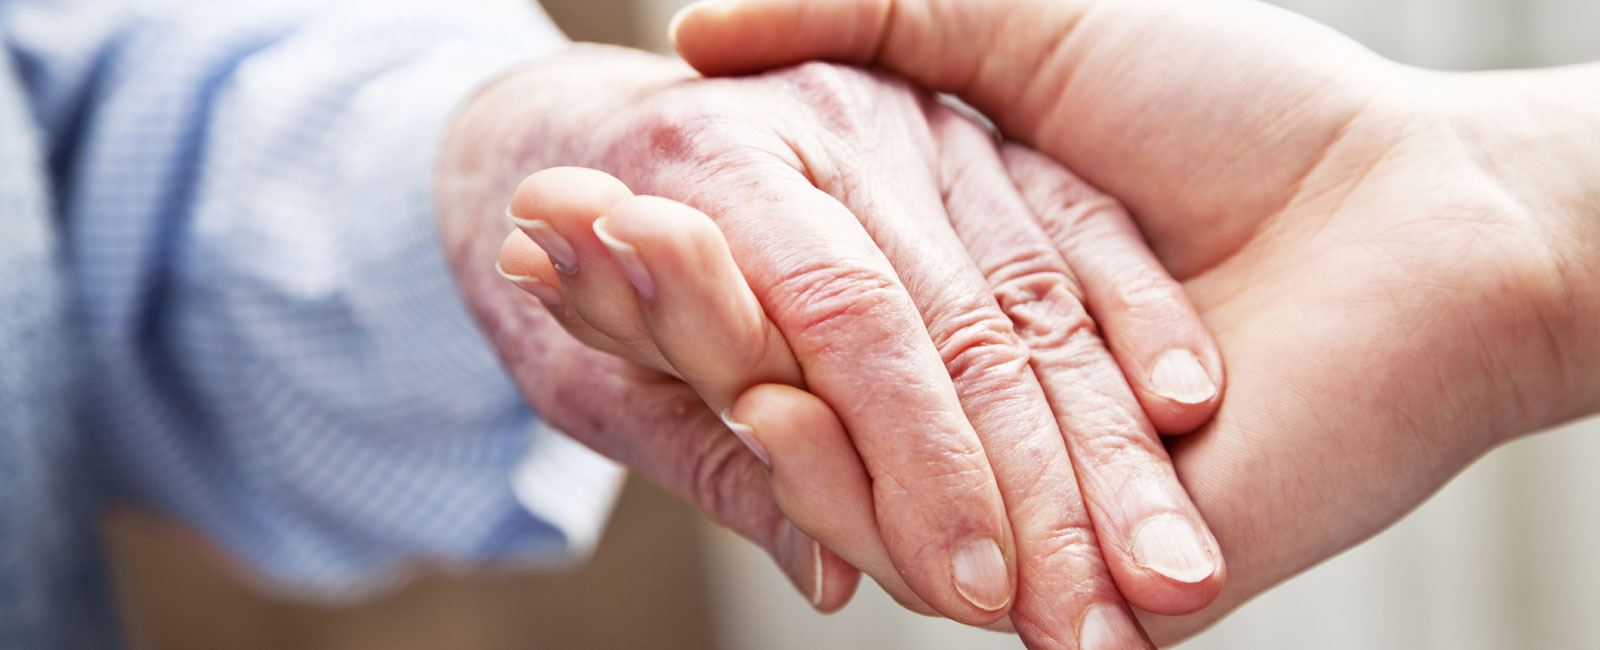 We Provide The Best Care, Compassion and Respect to Aging Seniors.